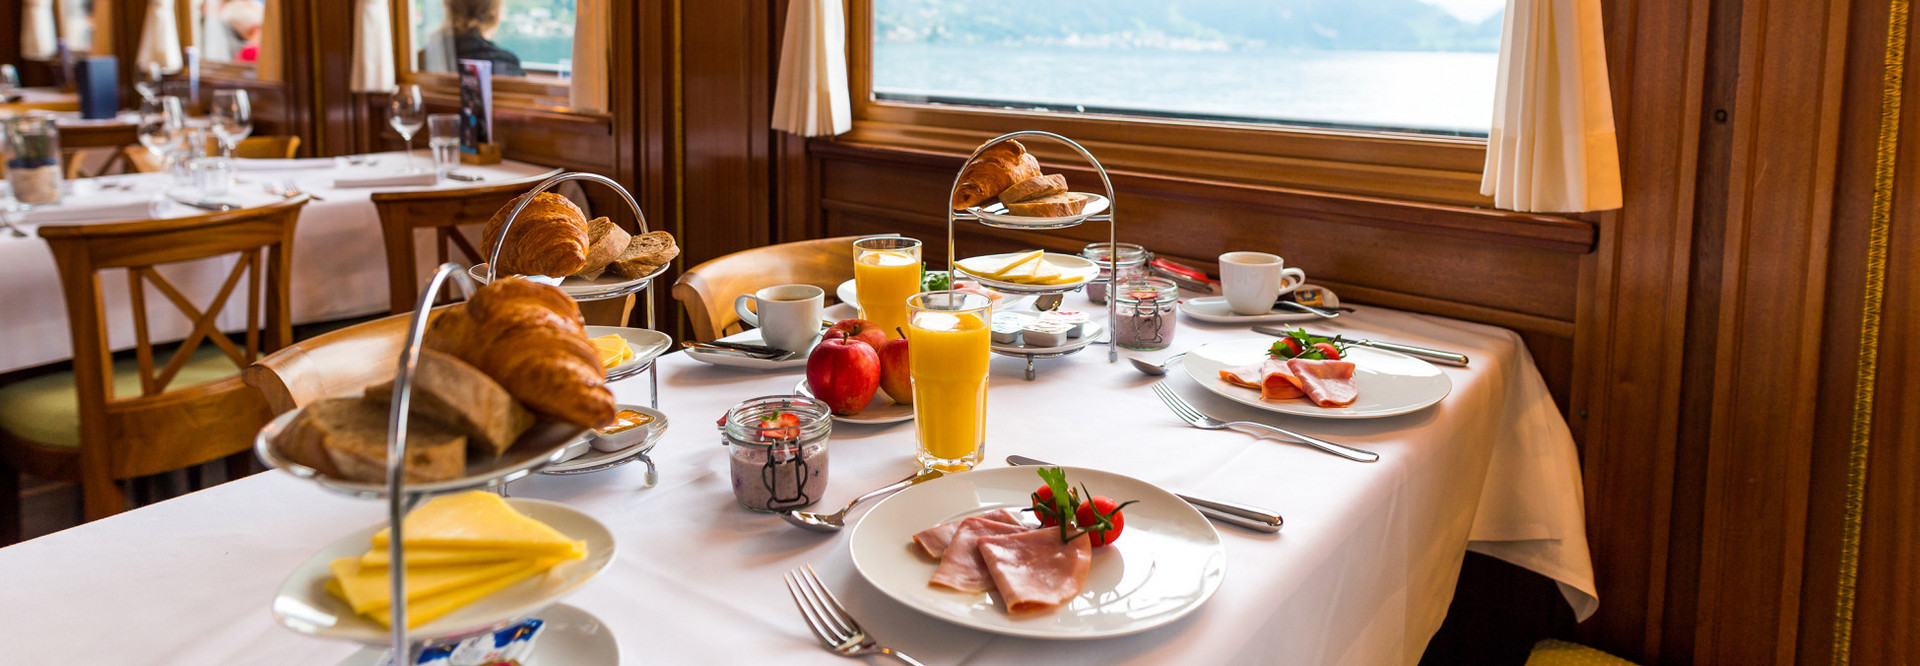 Fresh bread and croissants as well as delicious muesli are served on the breakfast cruise.